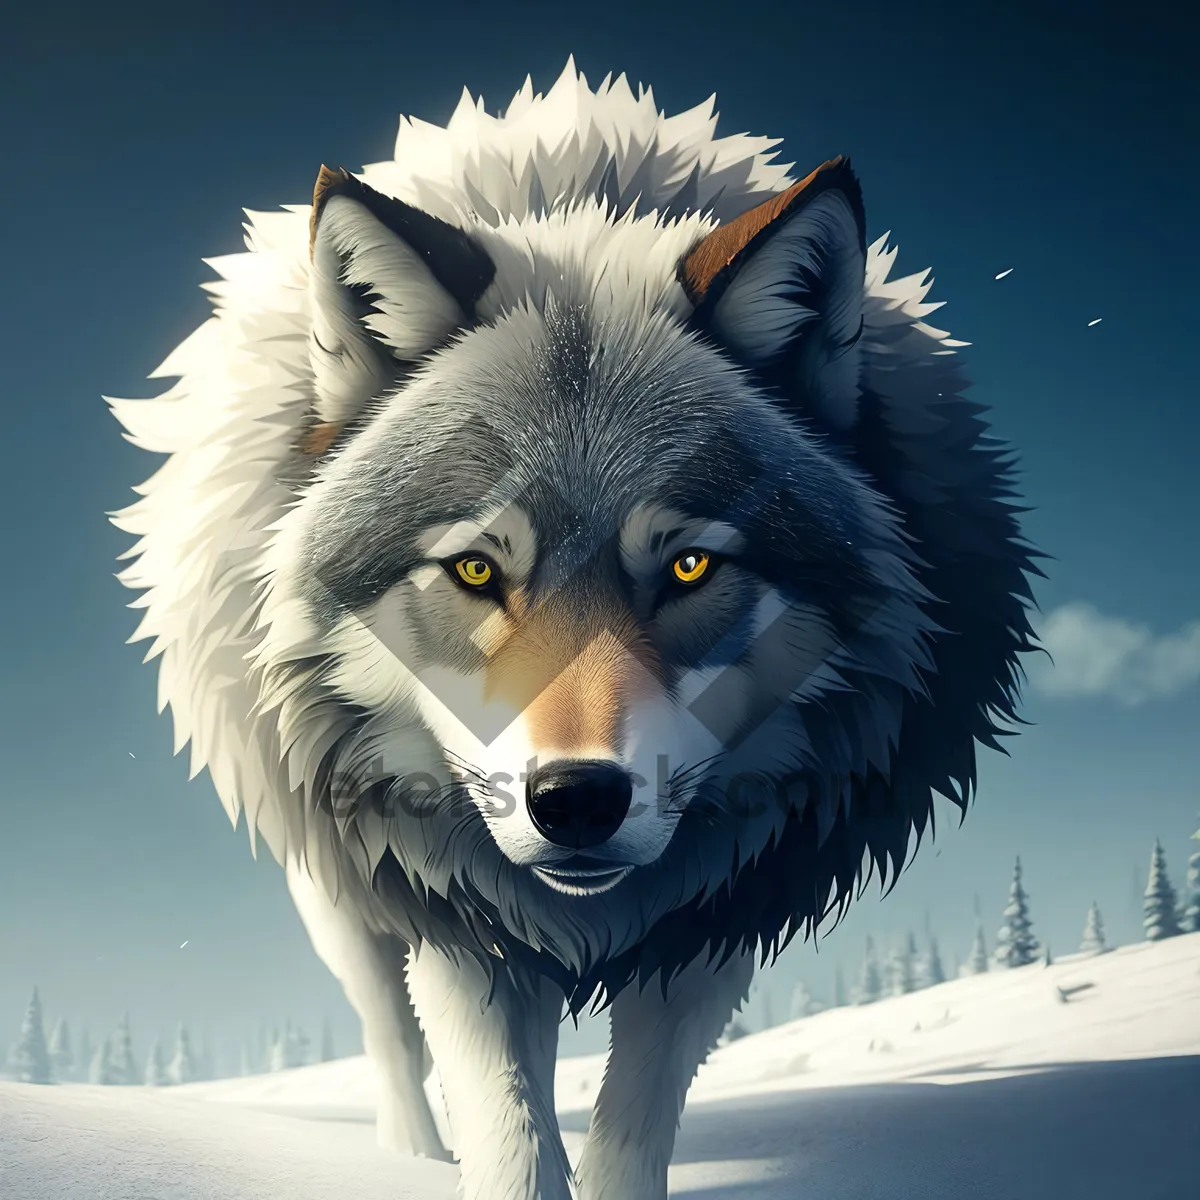 Picture of Adorable Snow White Portrait of a Resplendent Timber Wolf